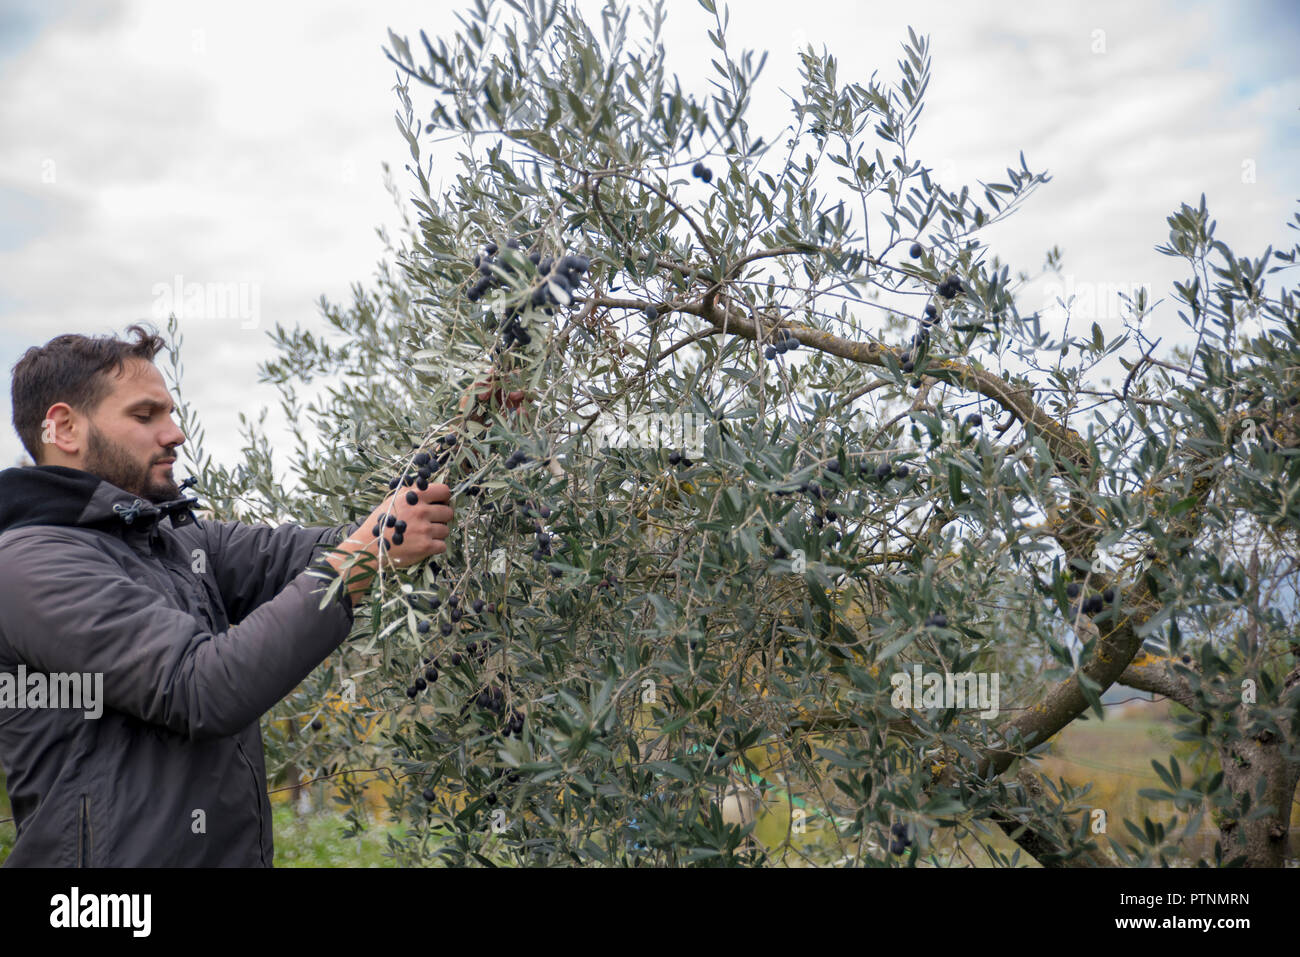 Italy. Farmers at work in harvesting olives in the countryside Stock Photo